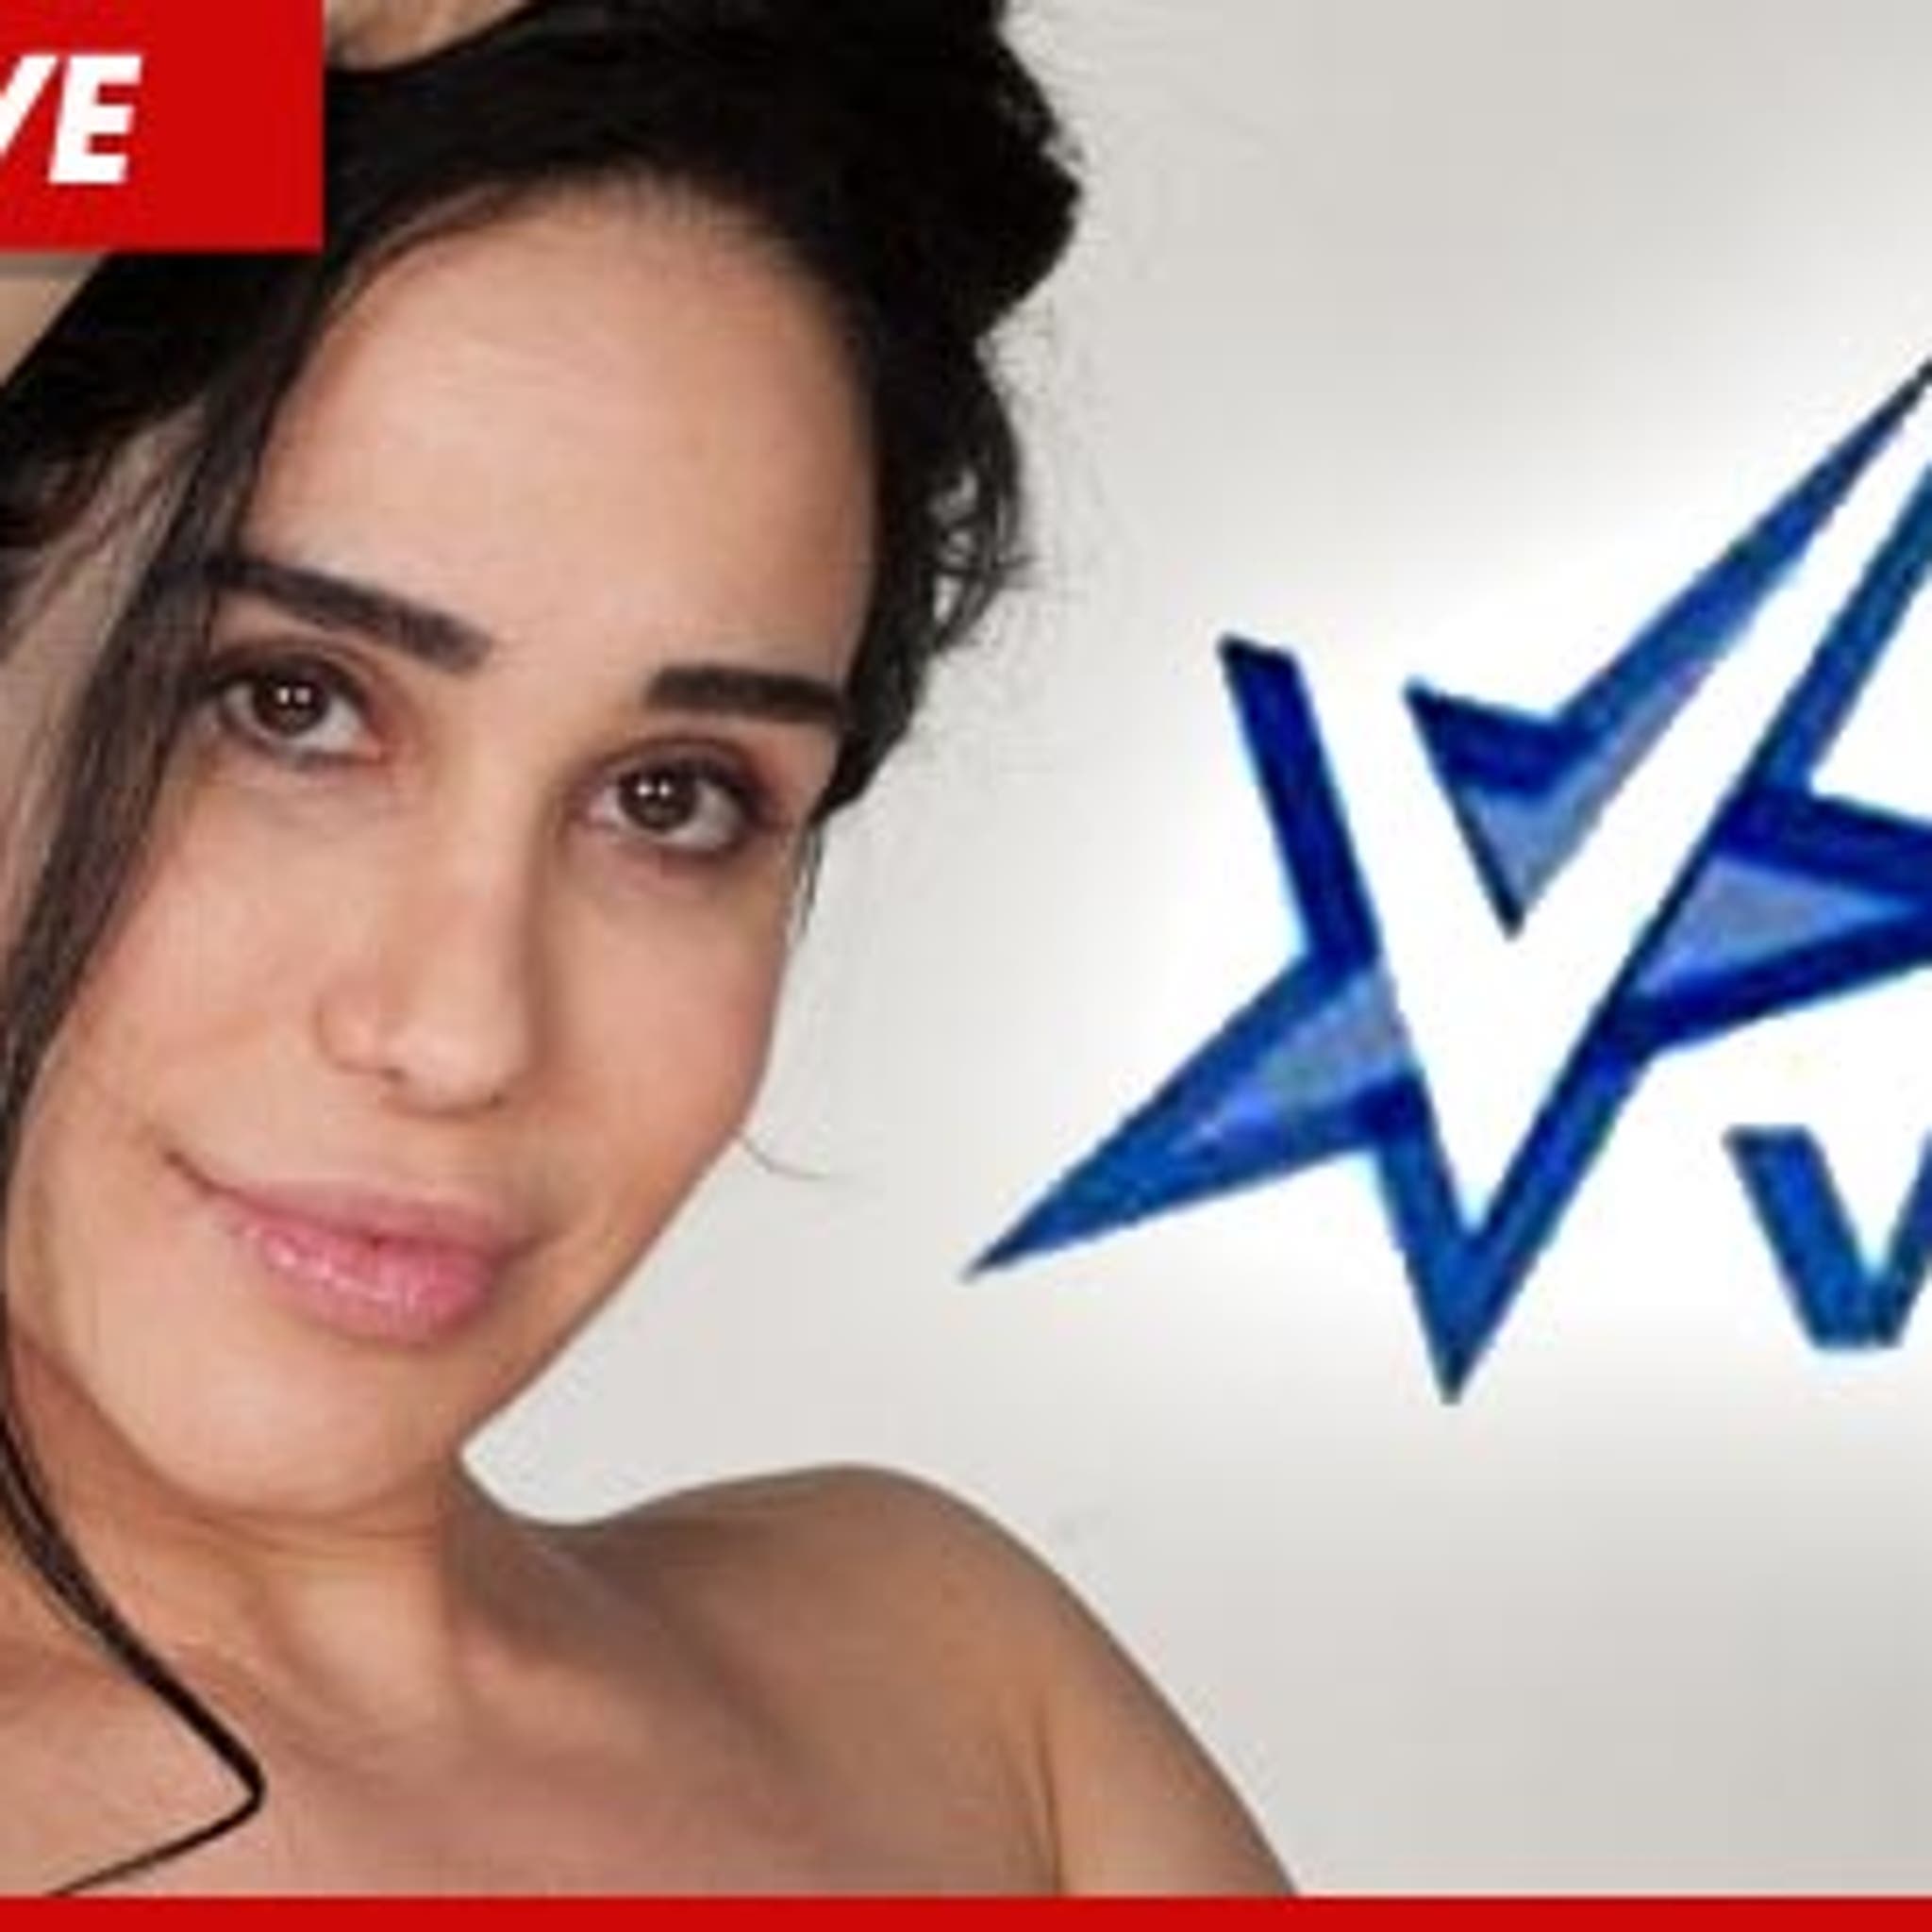 XXX Honcho to Octomom Nadya Suleman -- Your Porn Stock Is Plummeting